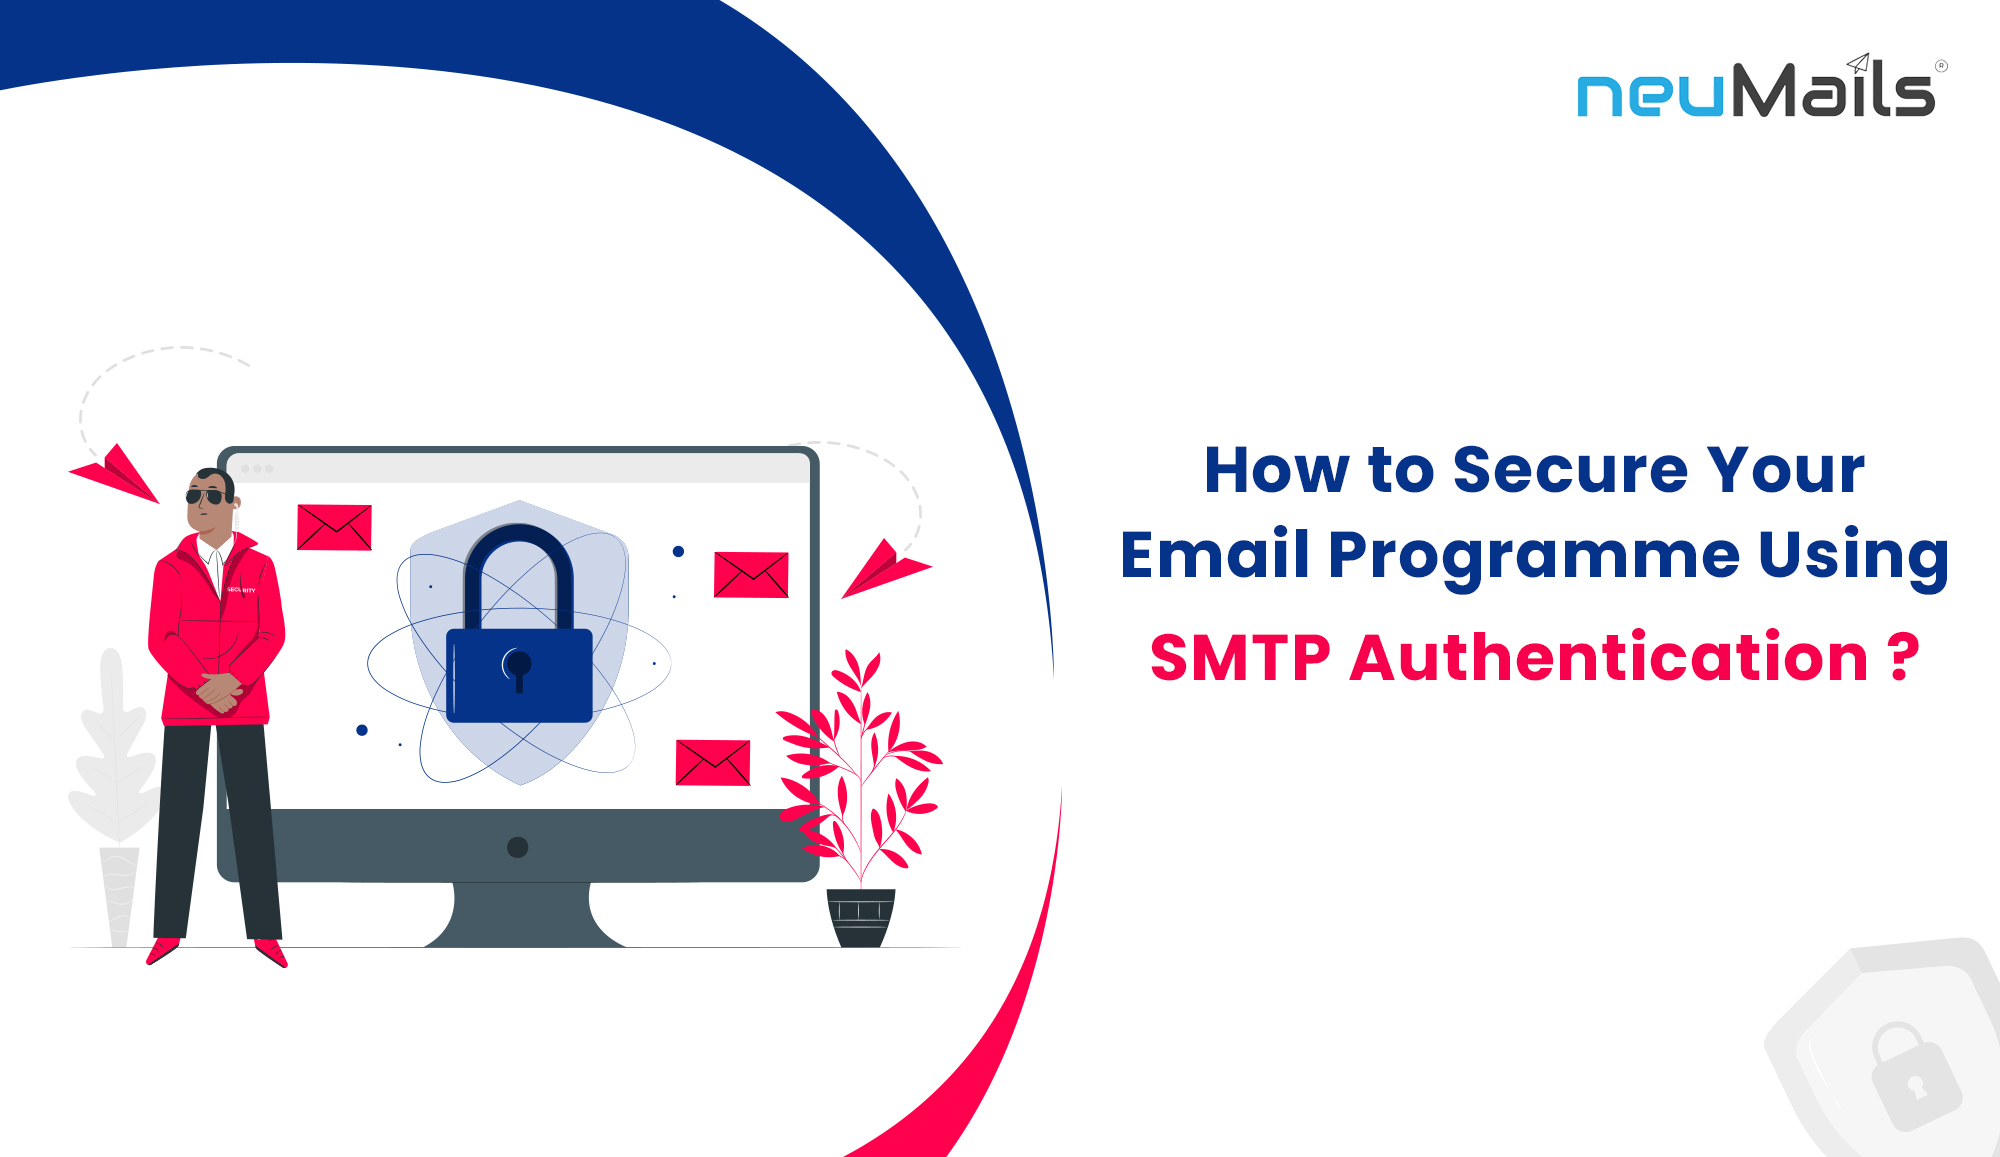 Secure Your Email Programme Using SMTP Authentication